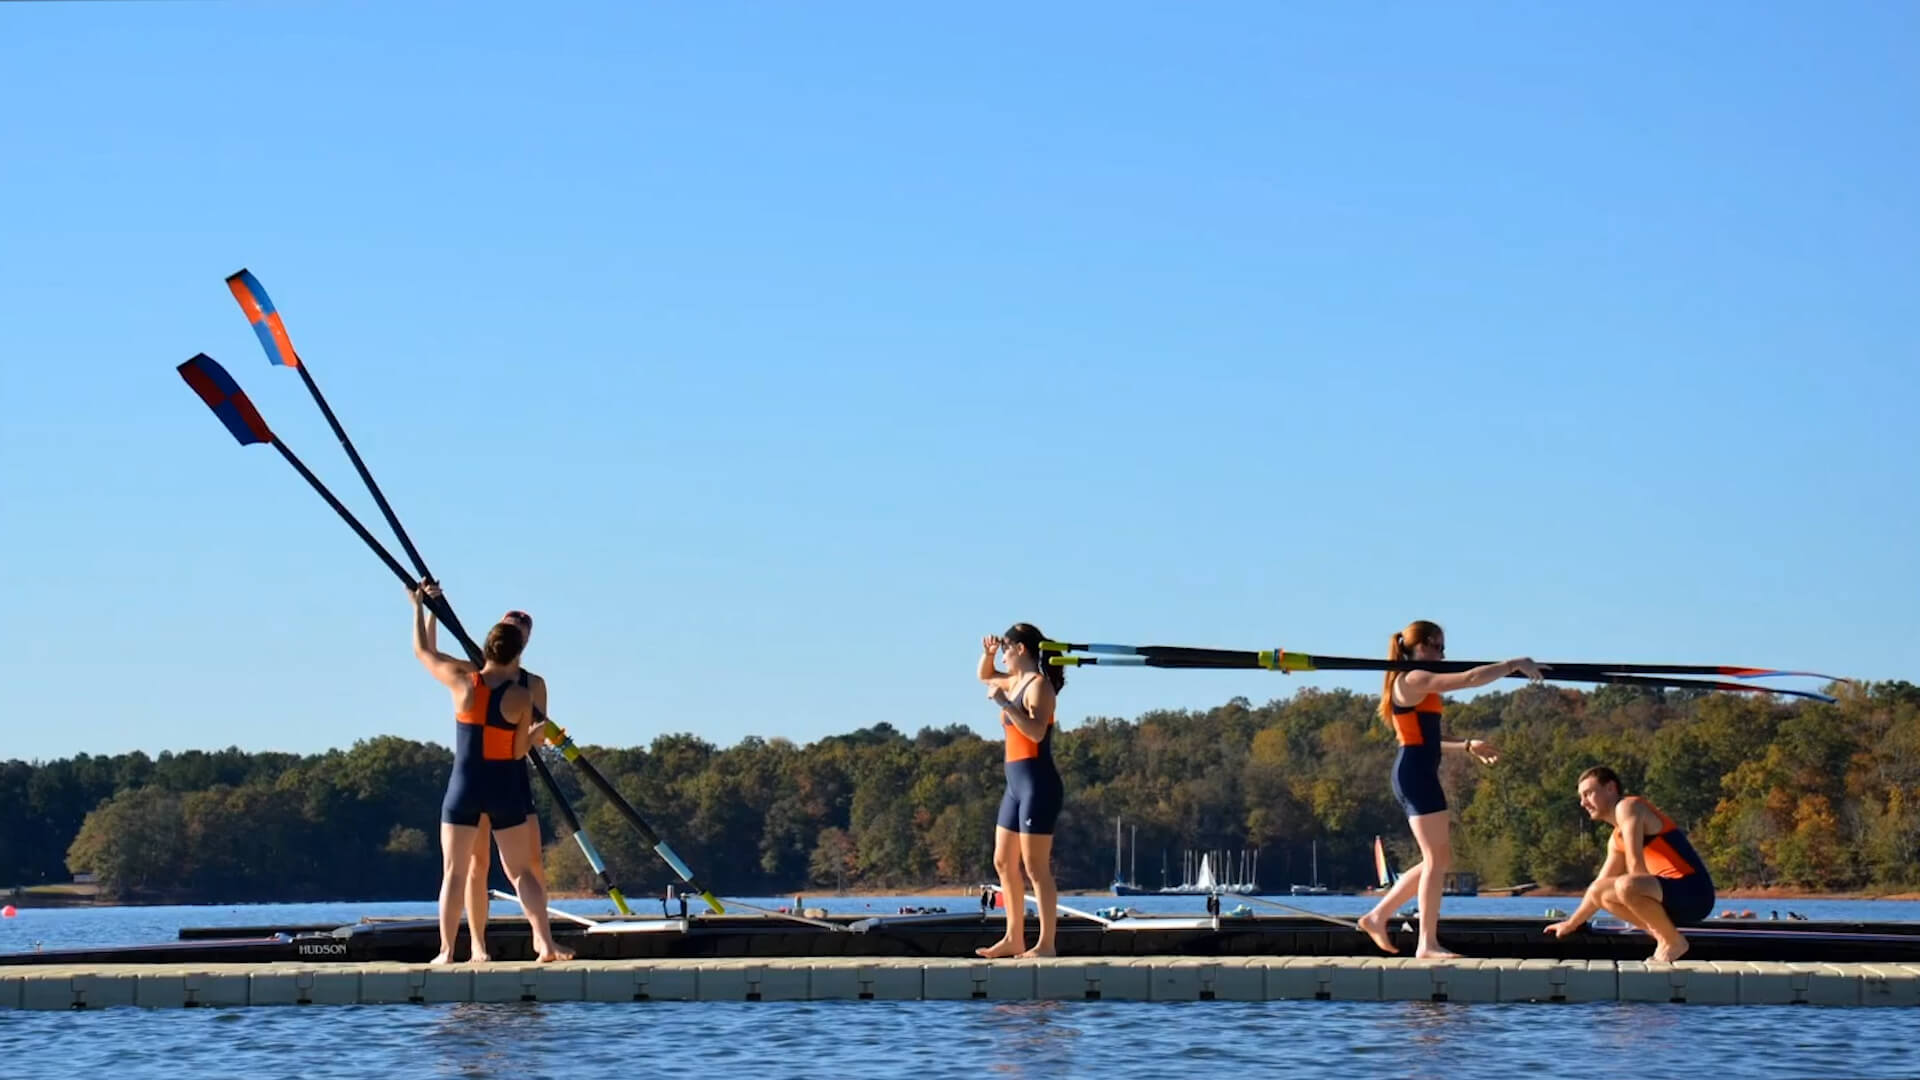 A rowing team is getting prepared to board their boat and launch